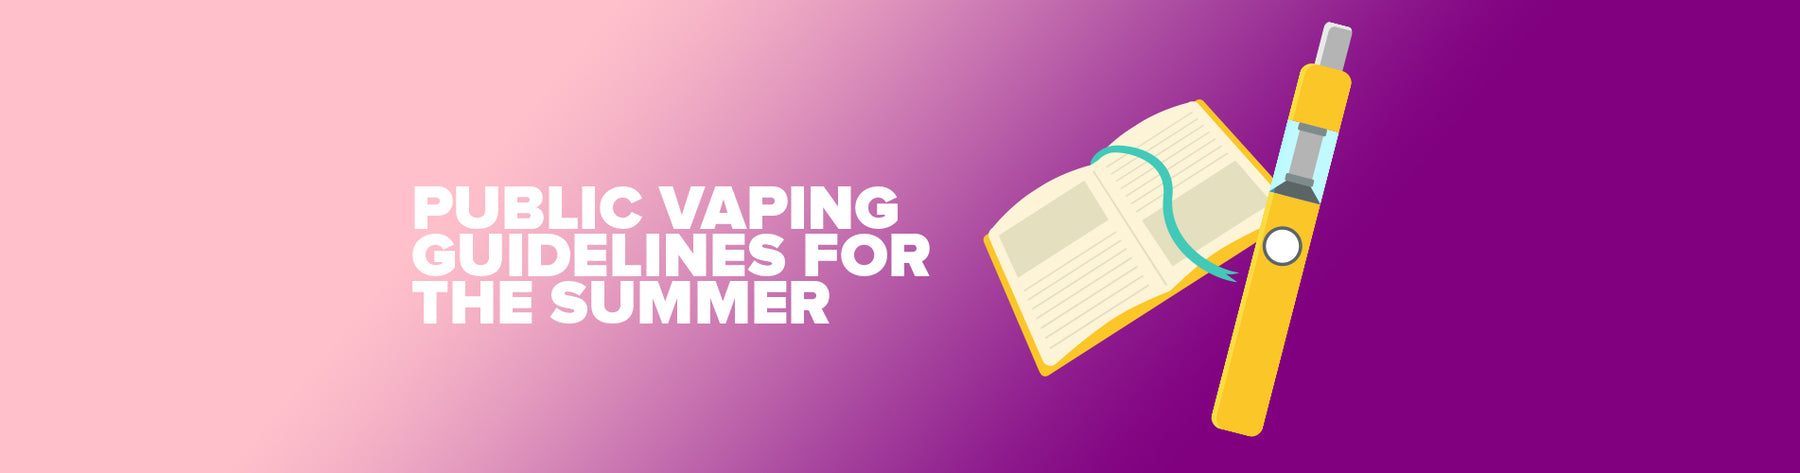 Public Vaping Guidelines For The Summer